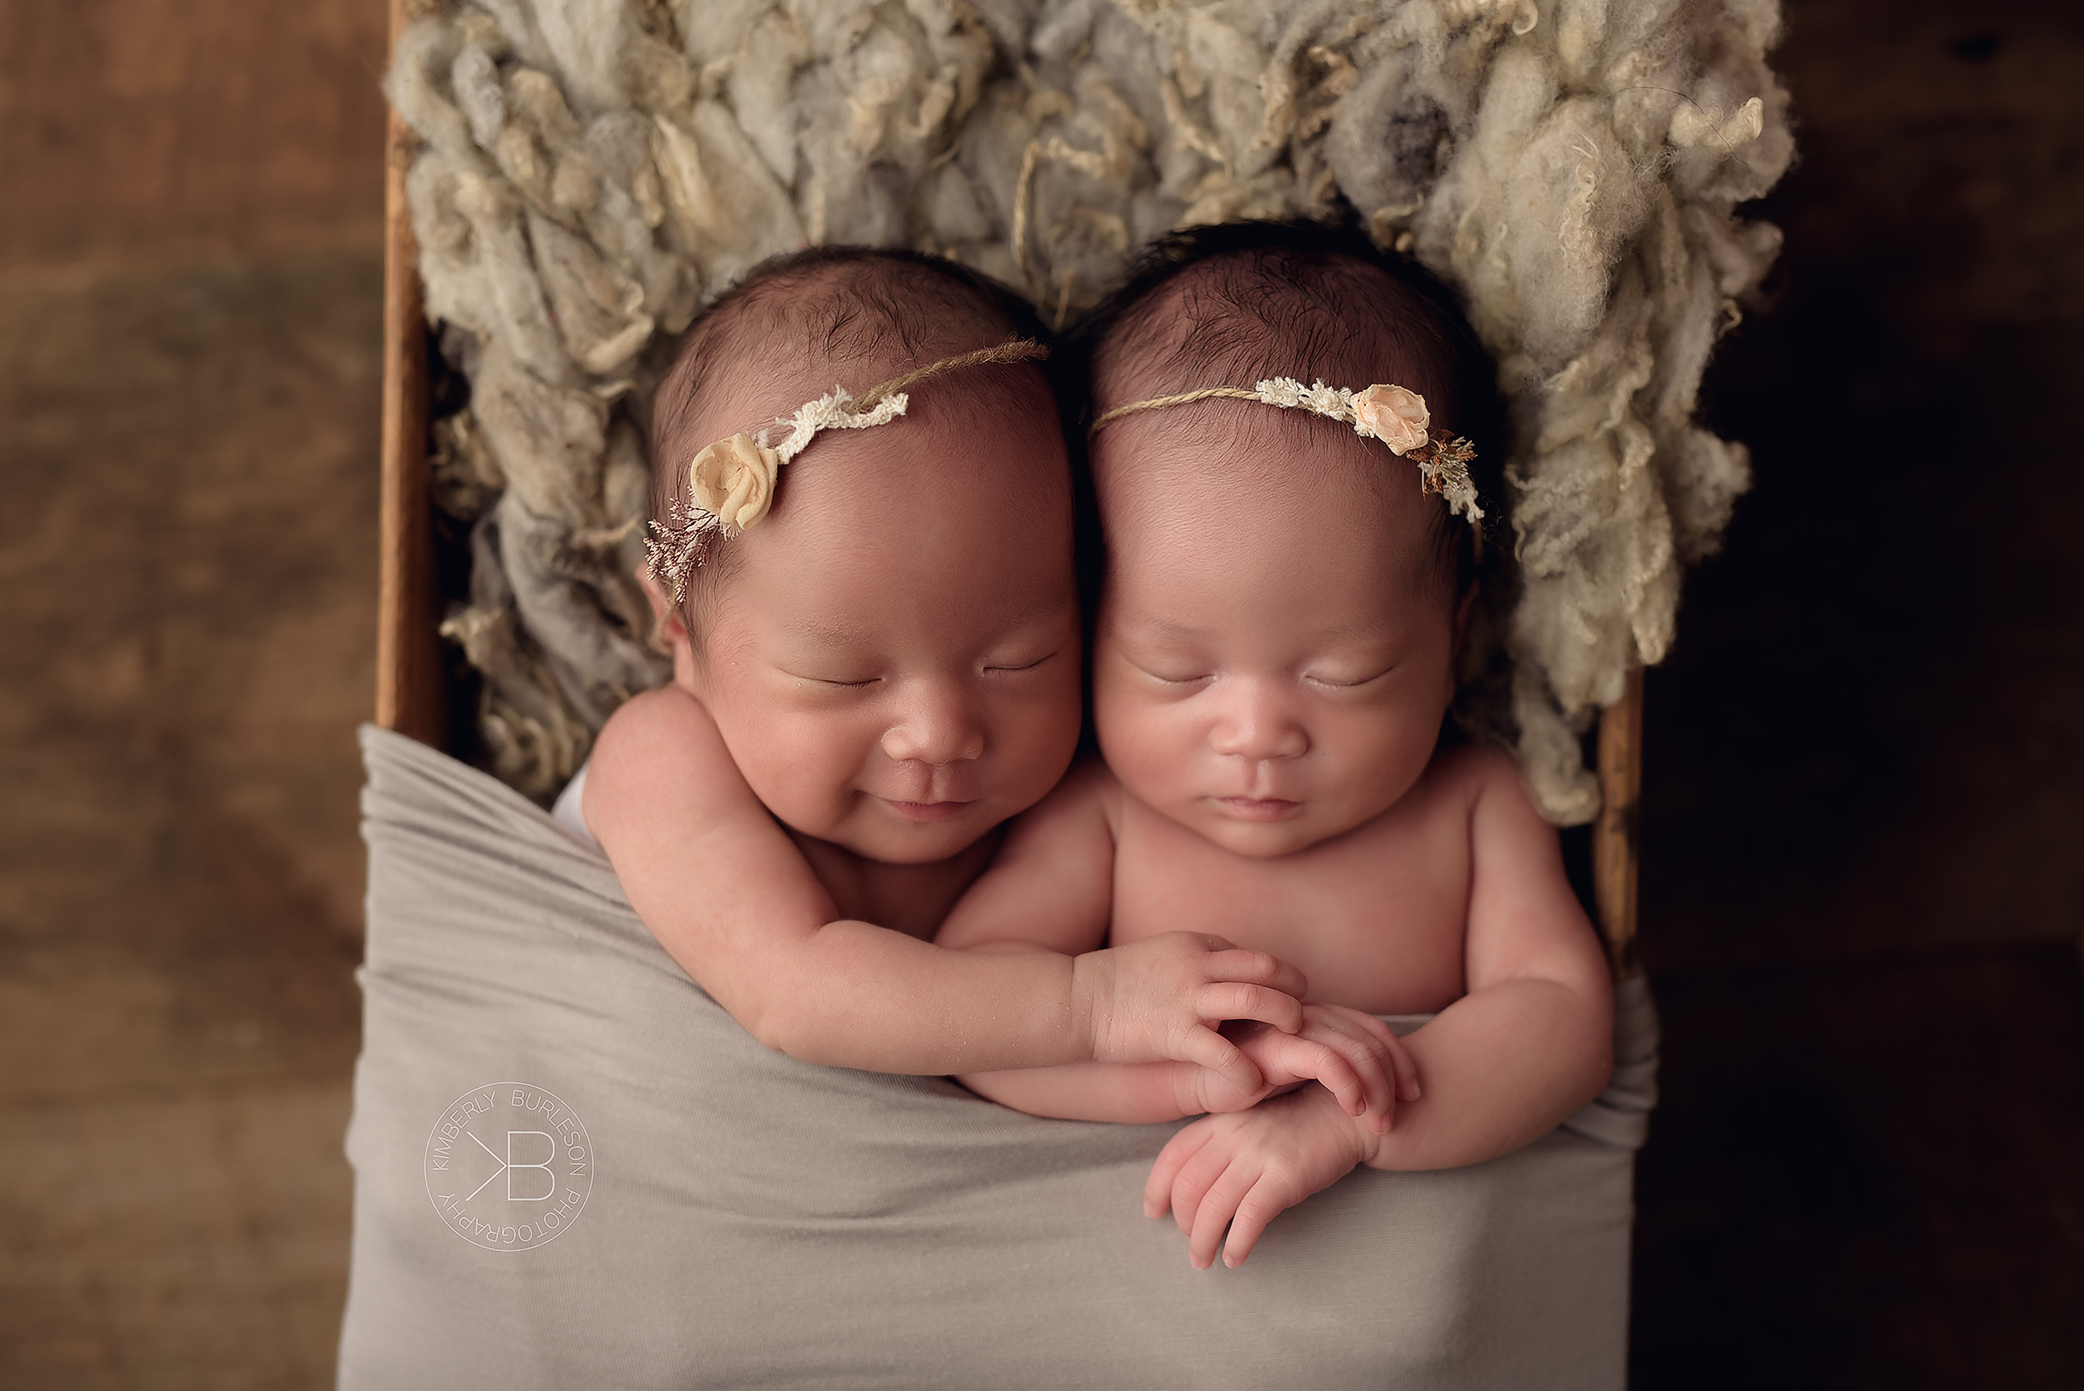 Twins Photographer in Houston Texas - Photographer Maternity and